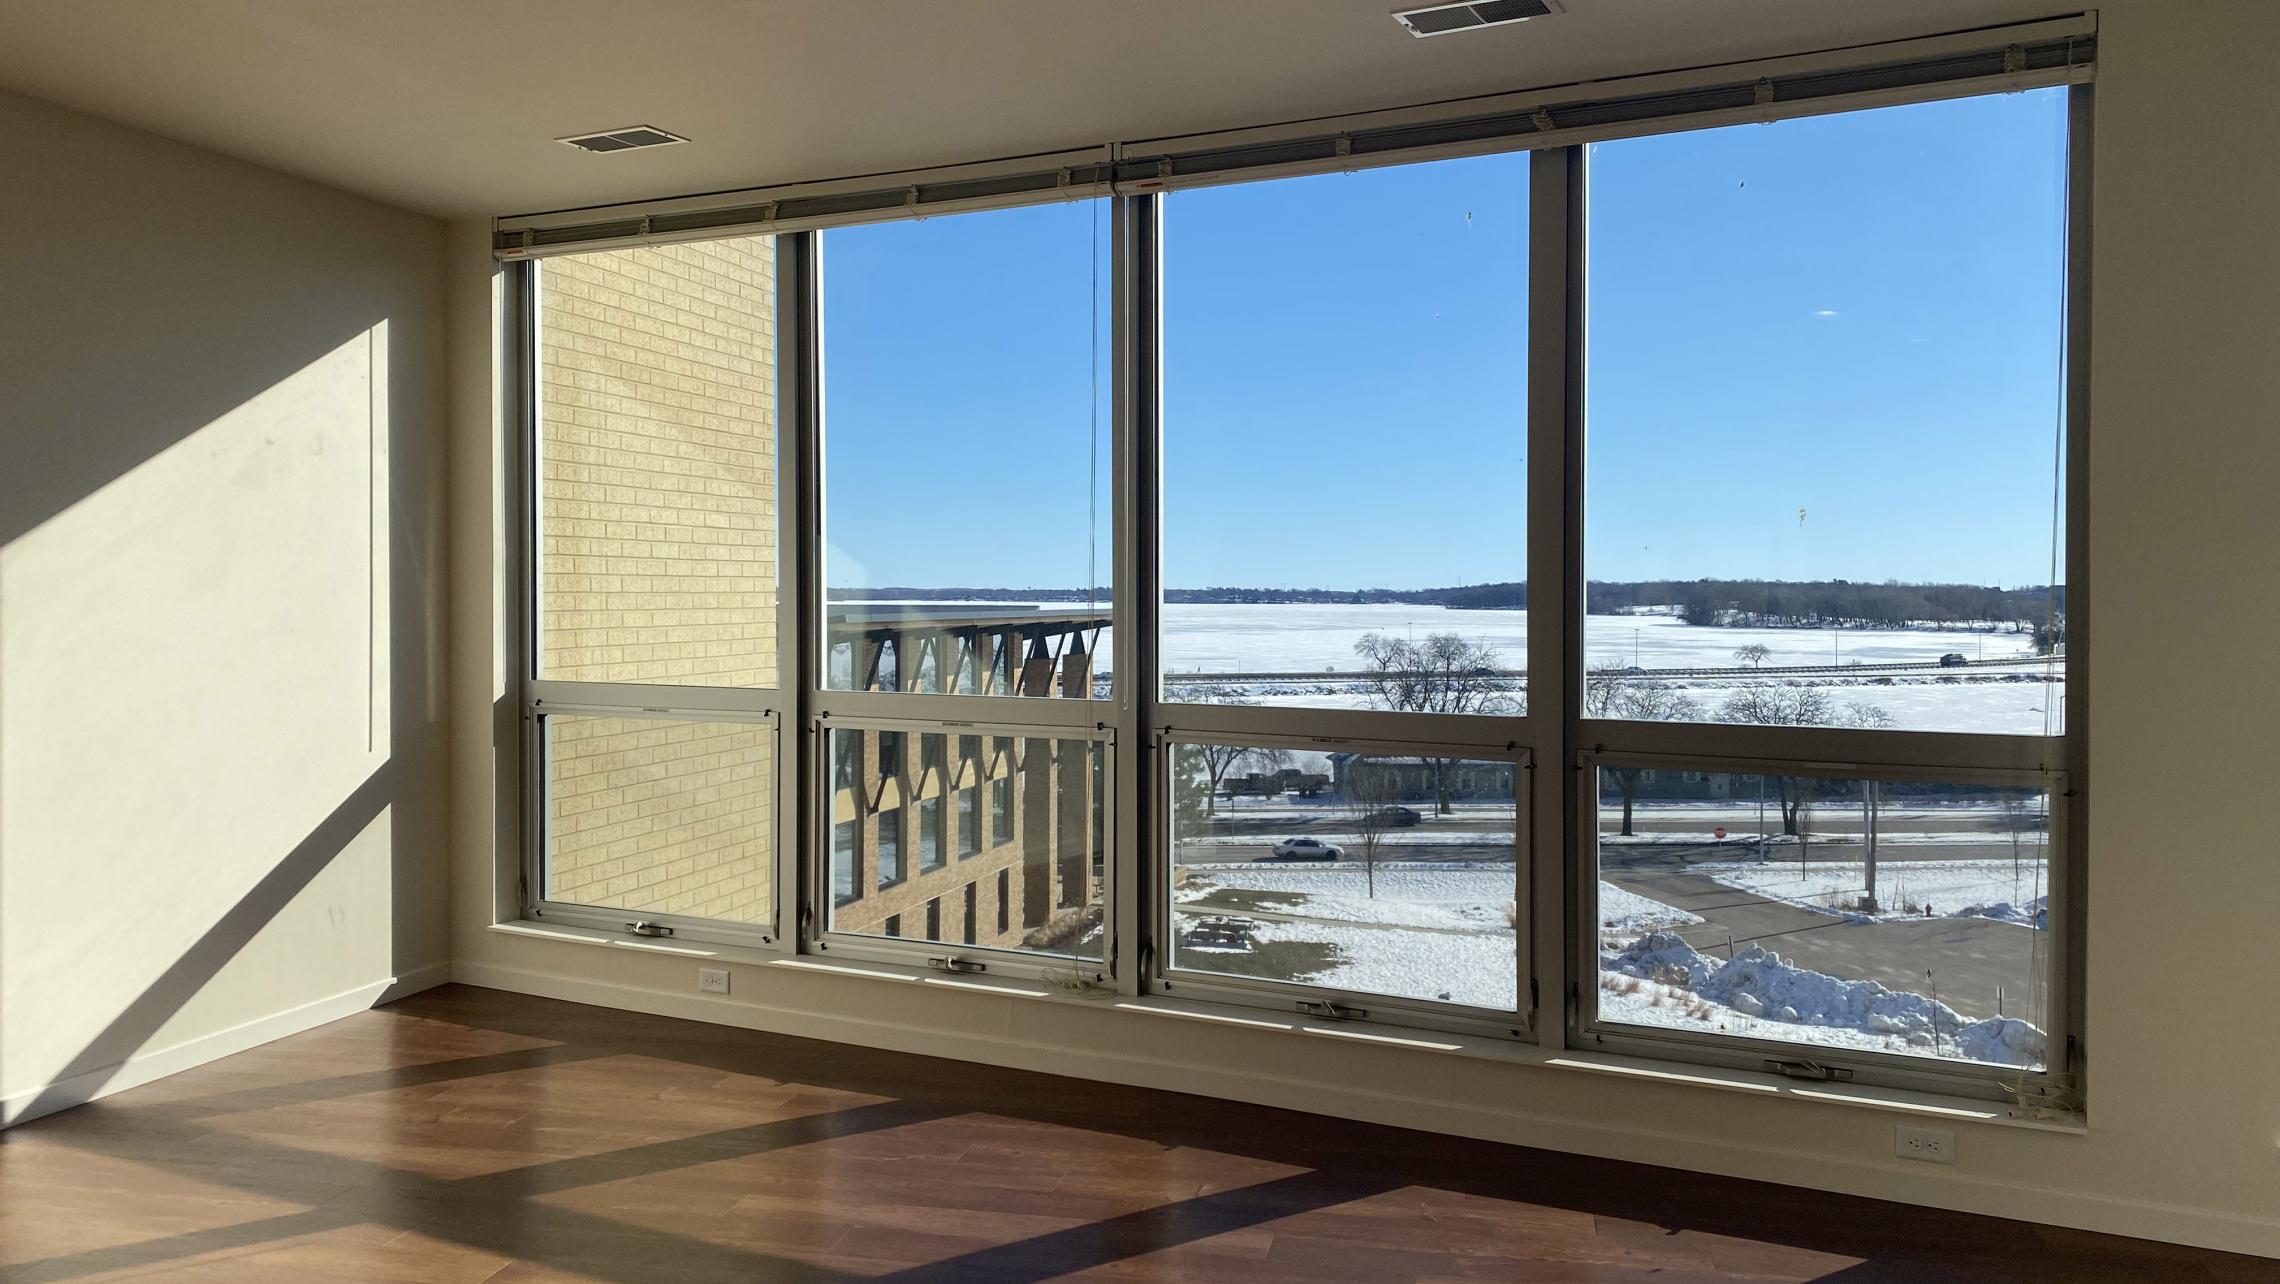 Nine-Line-at-The-Yards-Apartment-509-One-Bedrom-Corner-Lake-View-Top-Floor-Windows-Fitness-Kitchen-Living-Dining-Natural-Light-Modern-Upscale-Luxury-Maidson-Lake-Bike-Path-Dogs-Cats